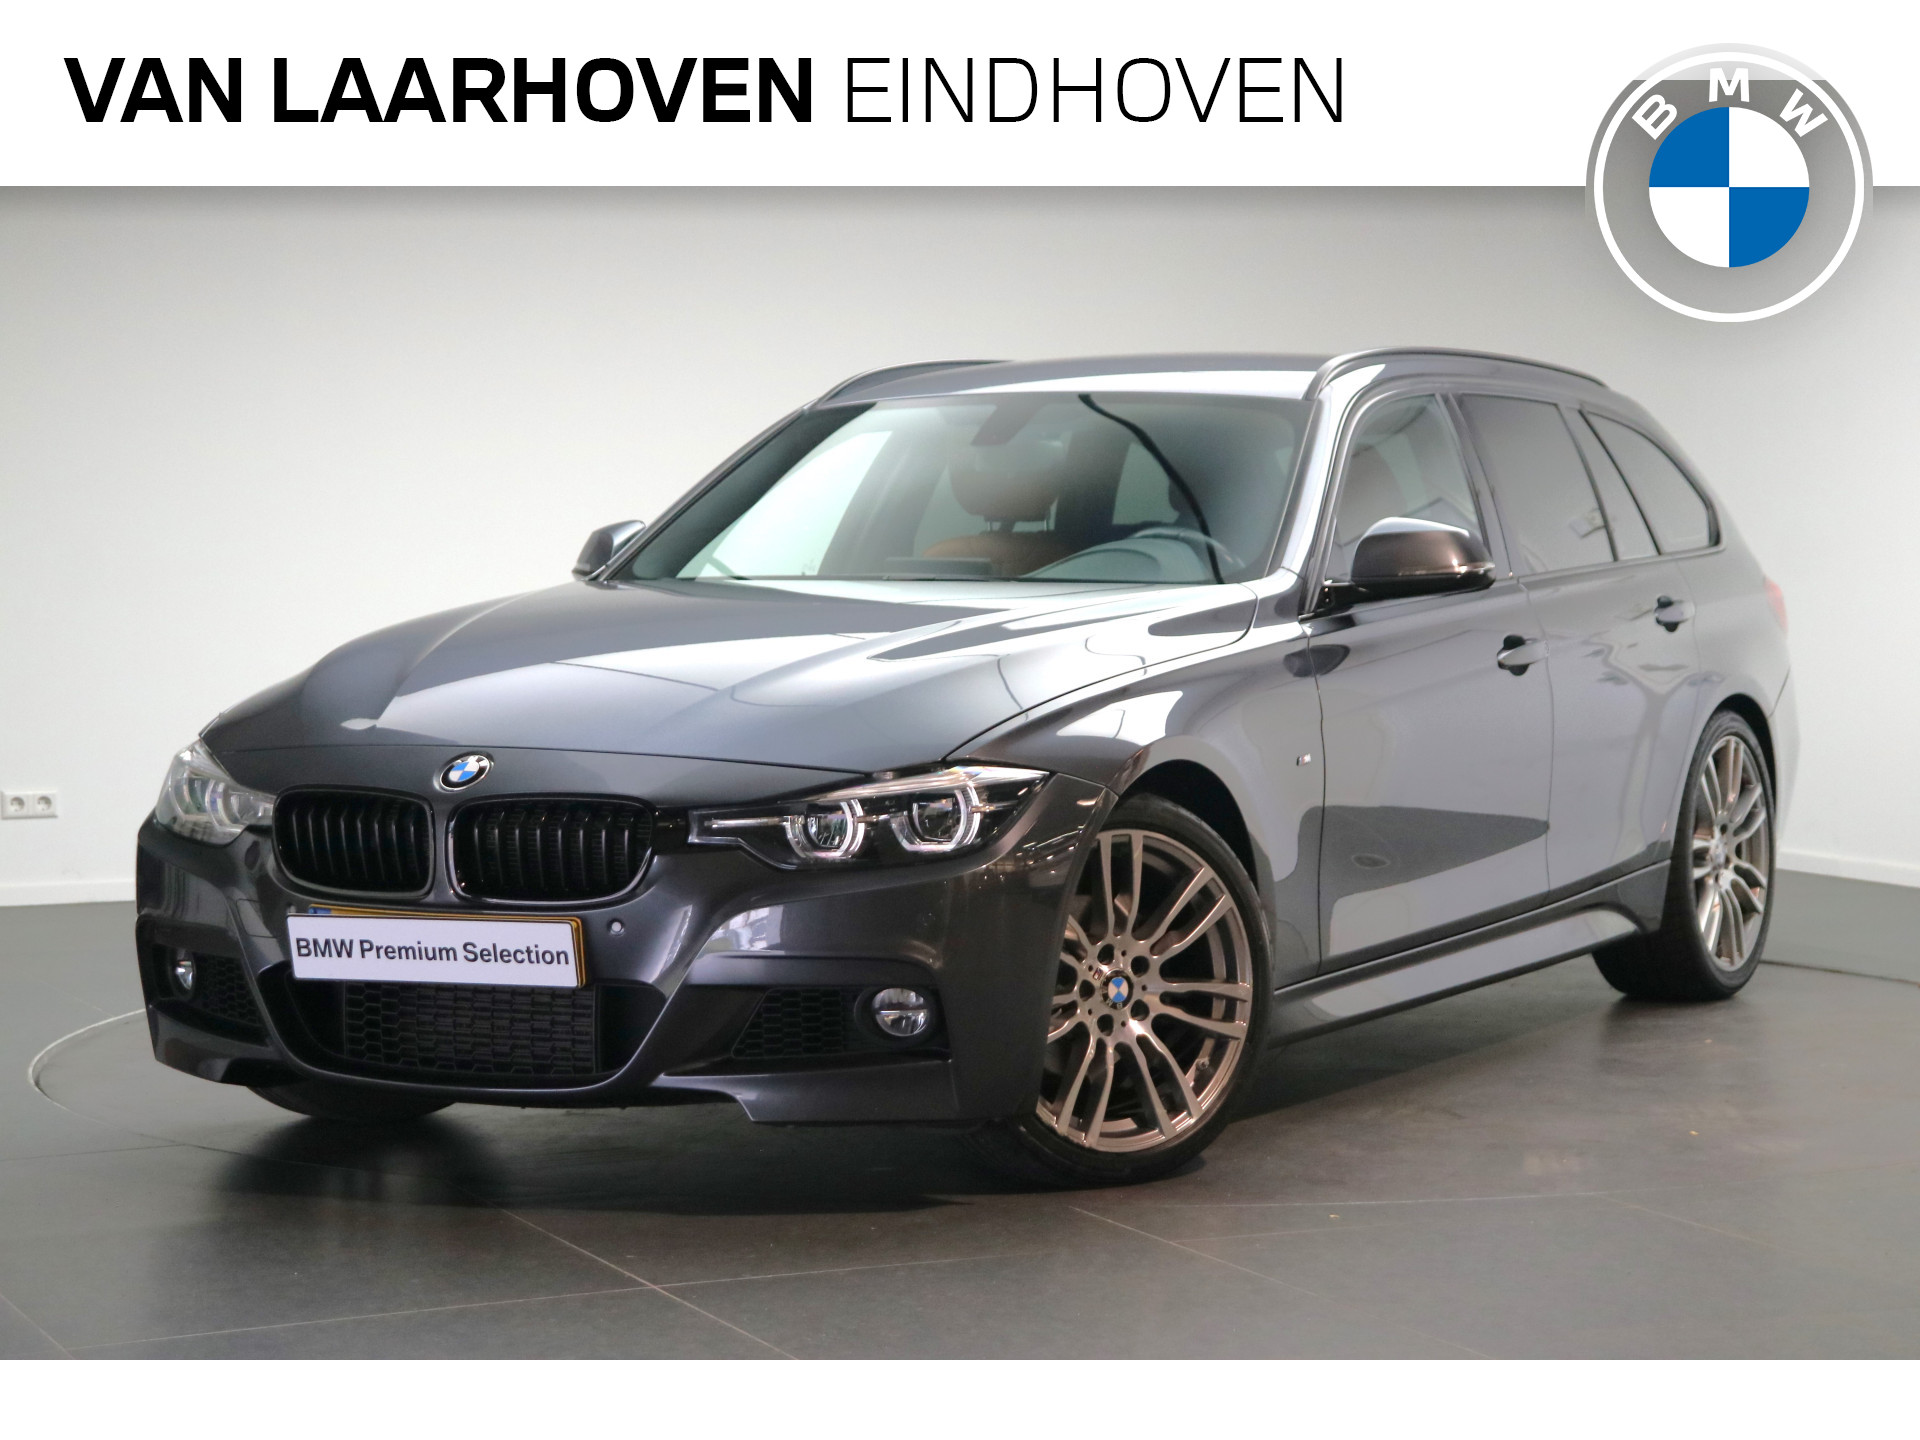 BMW 3 Serie Touring 318i Executive M Sport Automaat / Sportstoelen / Stoelverwarming / PDC / LED / Navigatie Professional / Airconditioning / Cruise Control